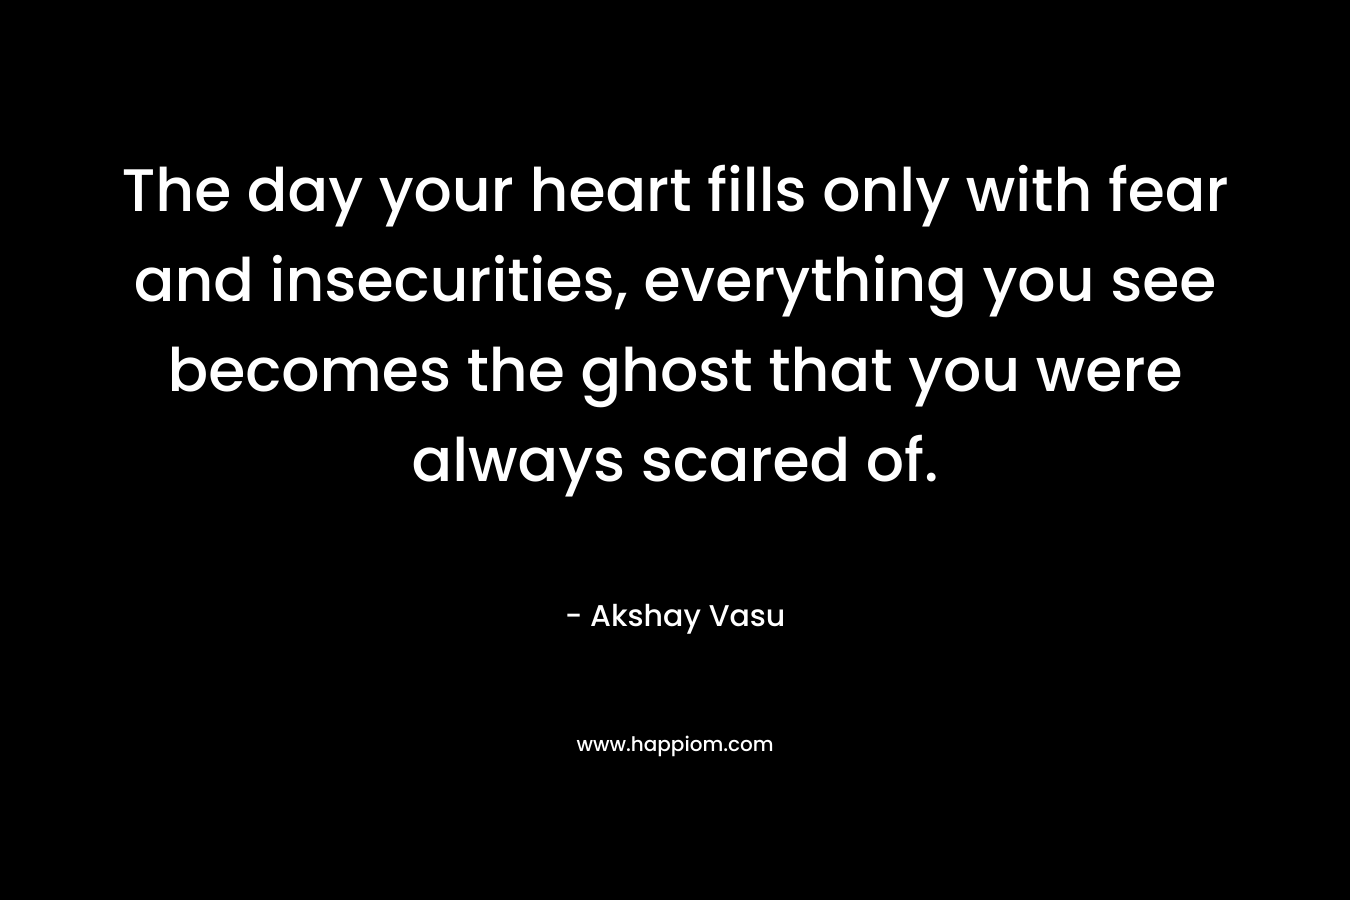 The day your heart fills only with fear and insecurities, everything you see becomes the ghost that you were always scared of.